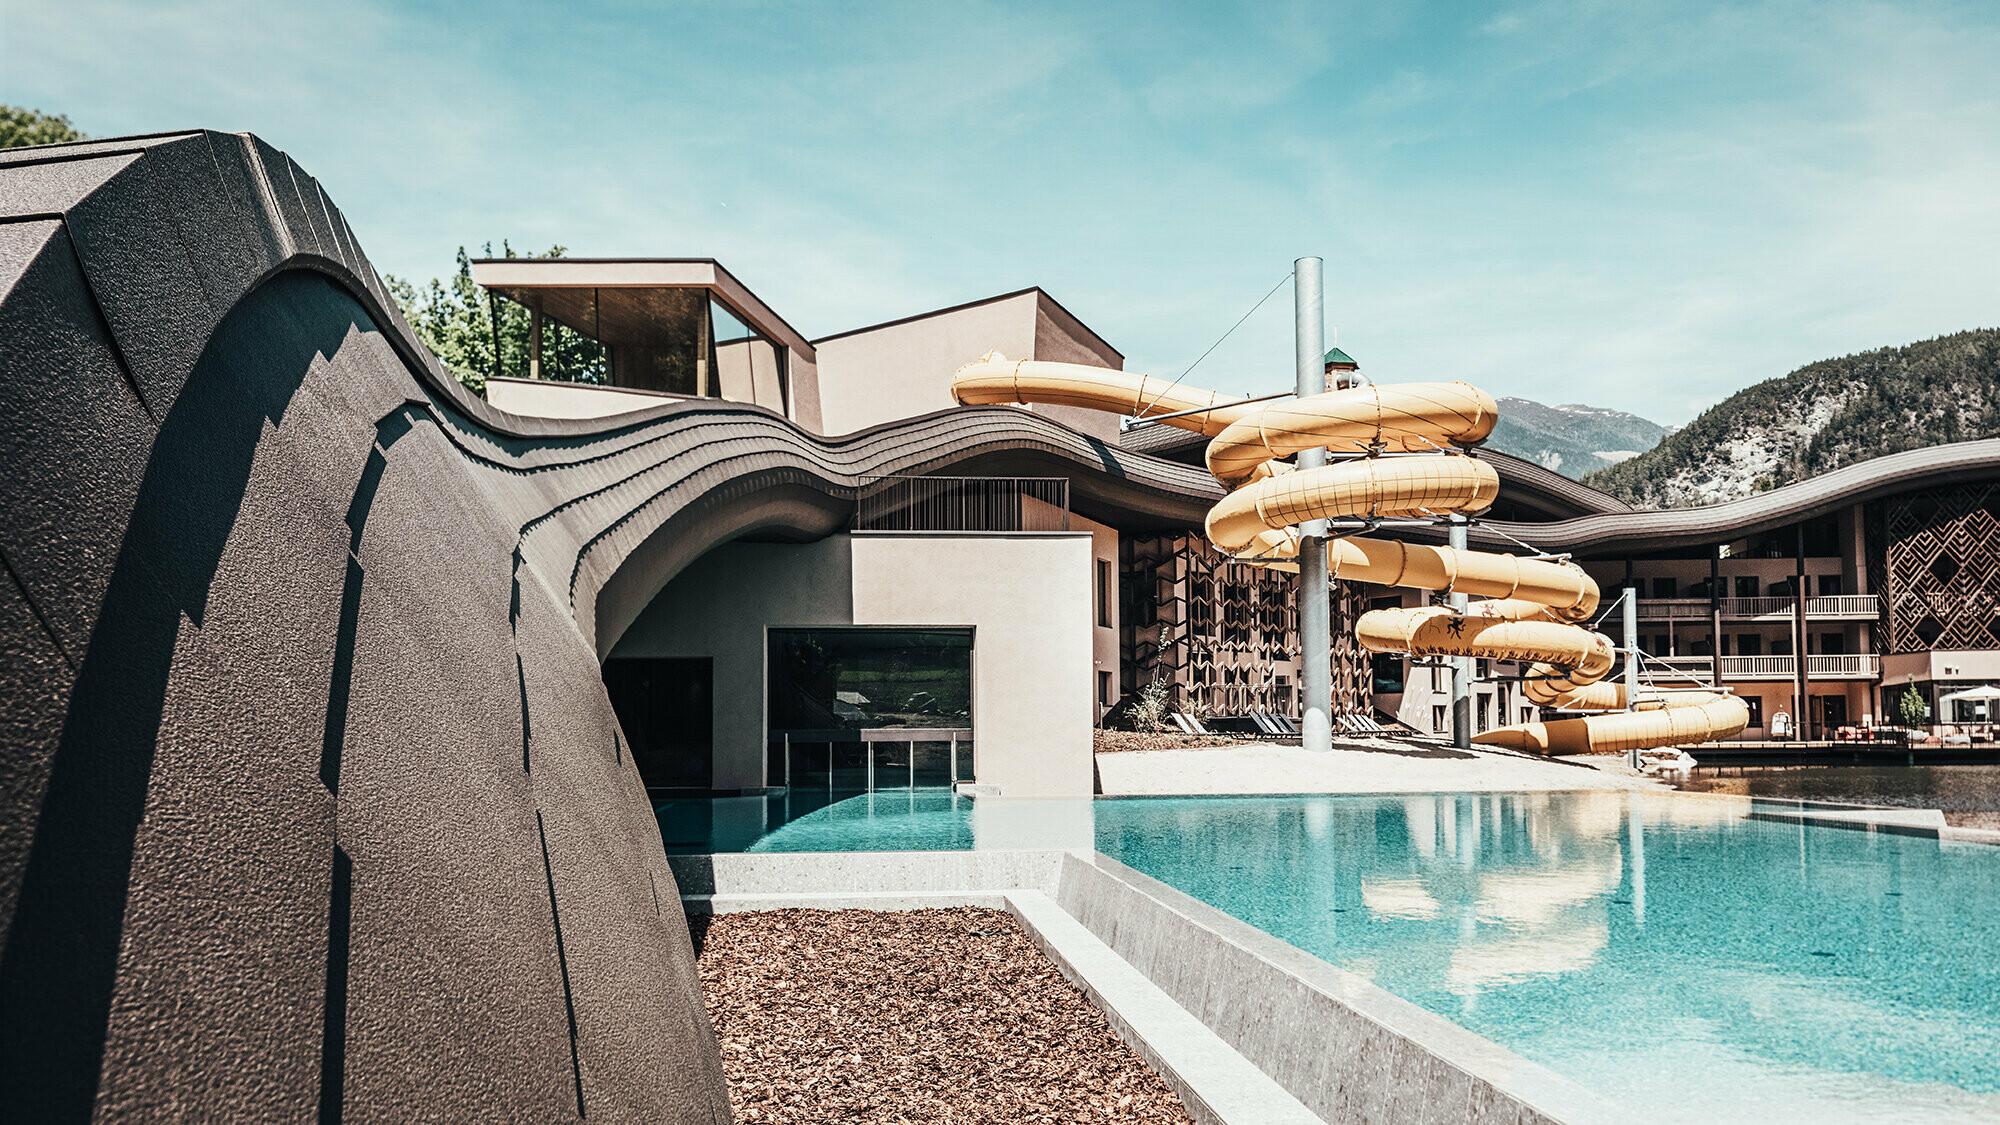  View of the pool at the Falkensteiner Hotel, a yellow water slide can be seen in the background. The roof wave of PREFA facade shingles in P.10 brown runs across the entire complex.